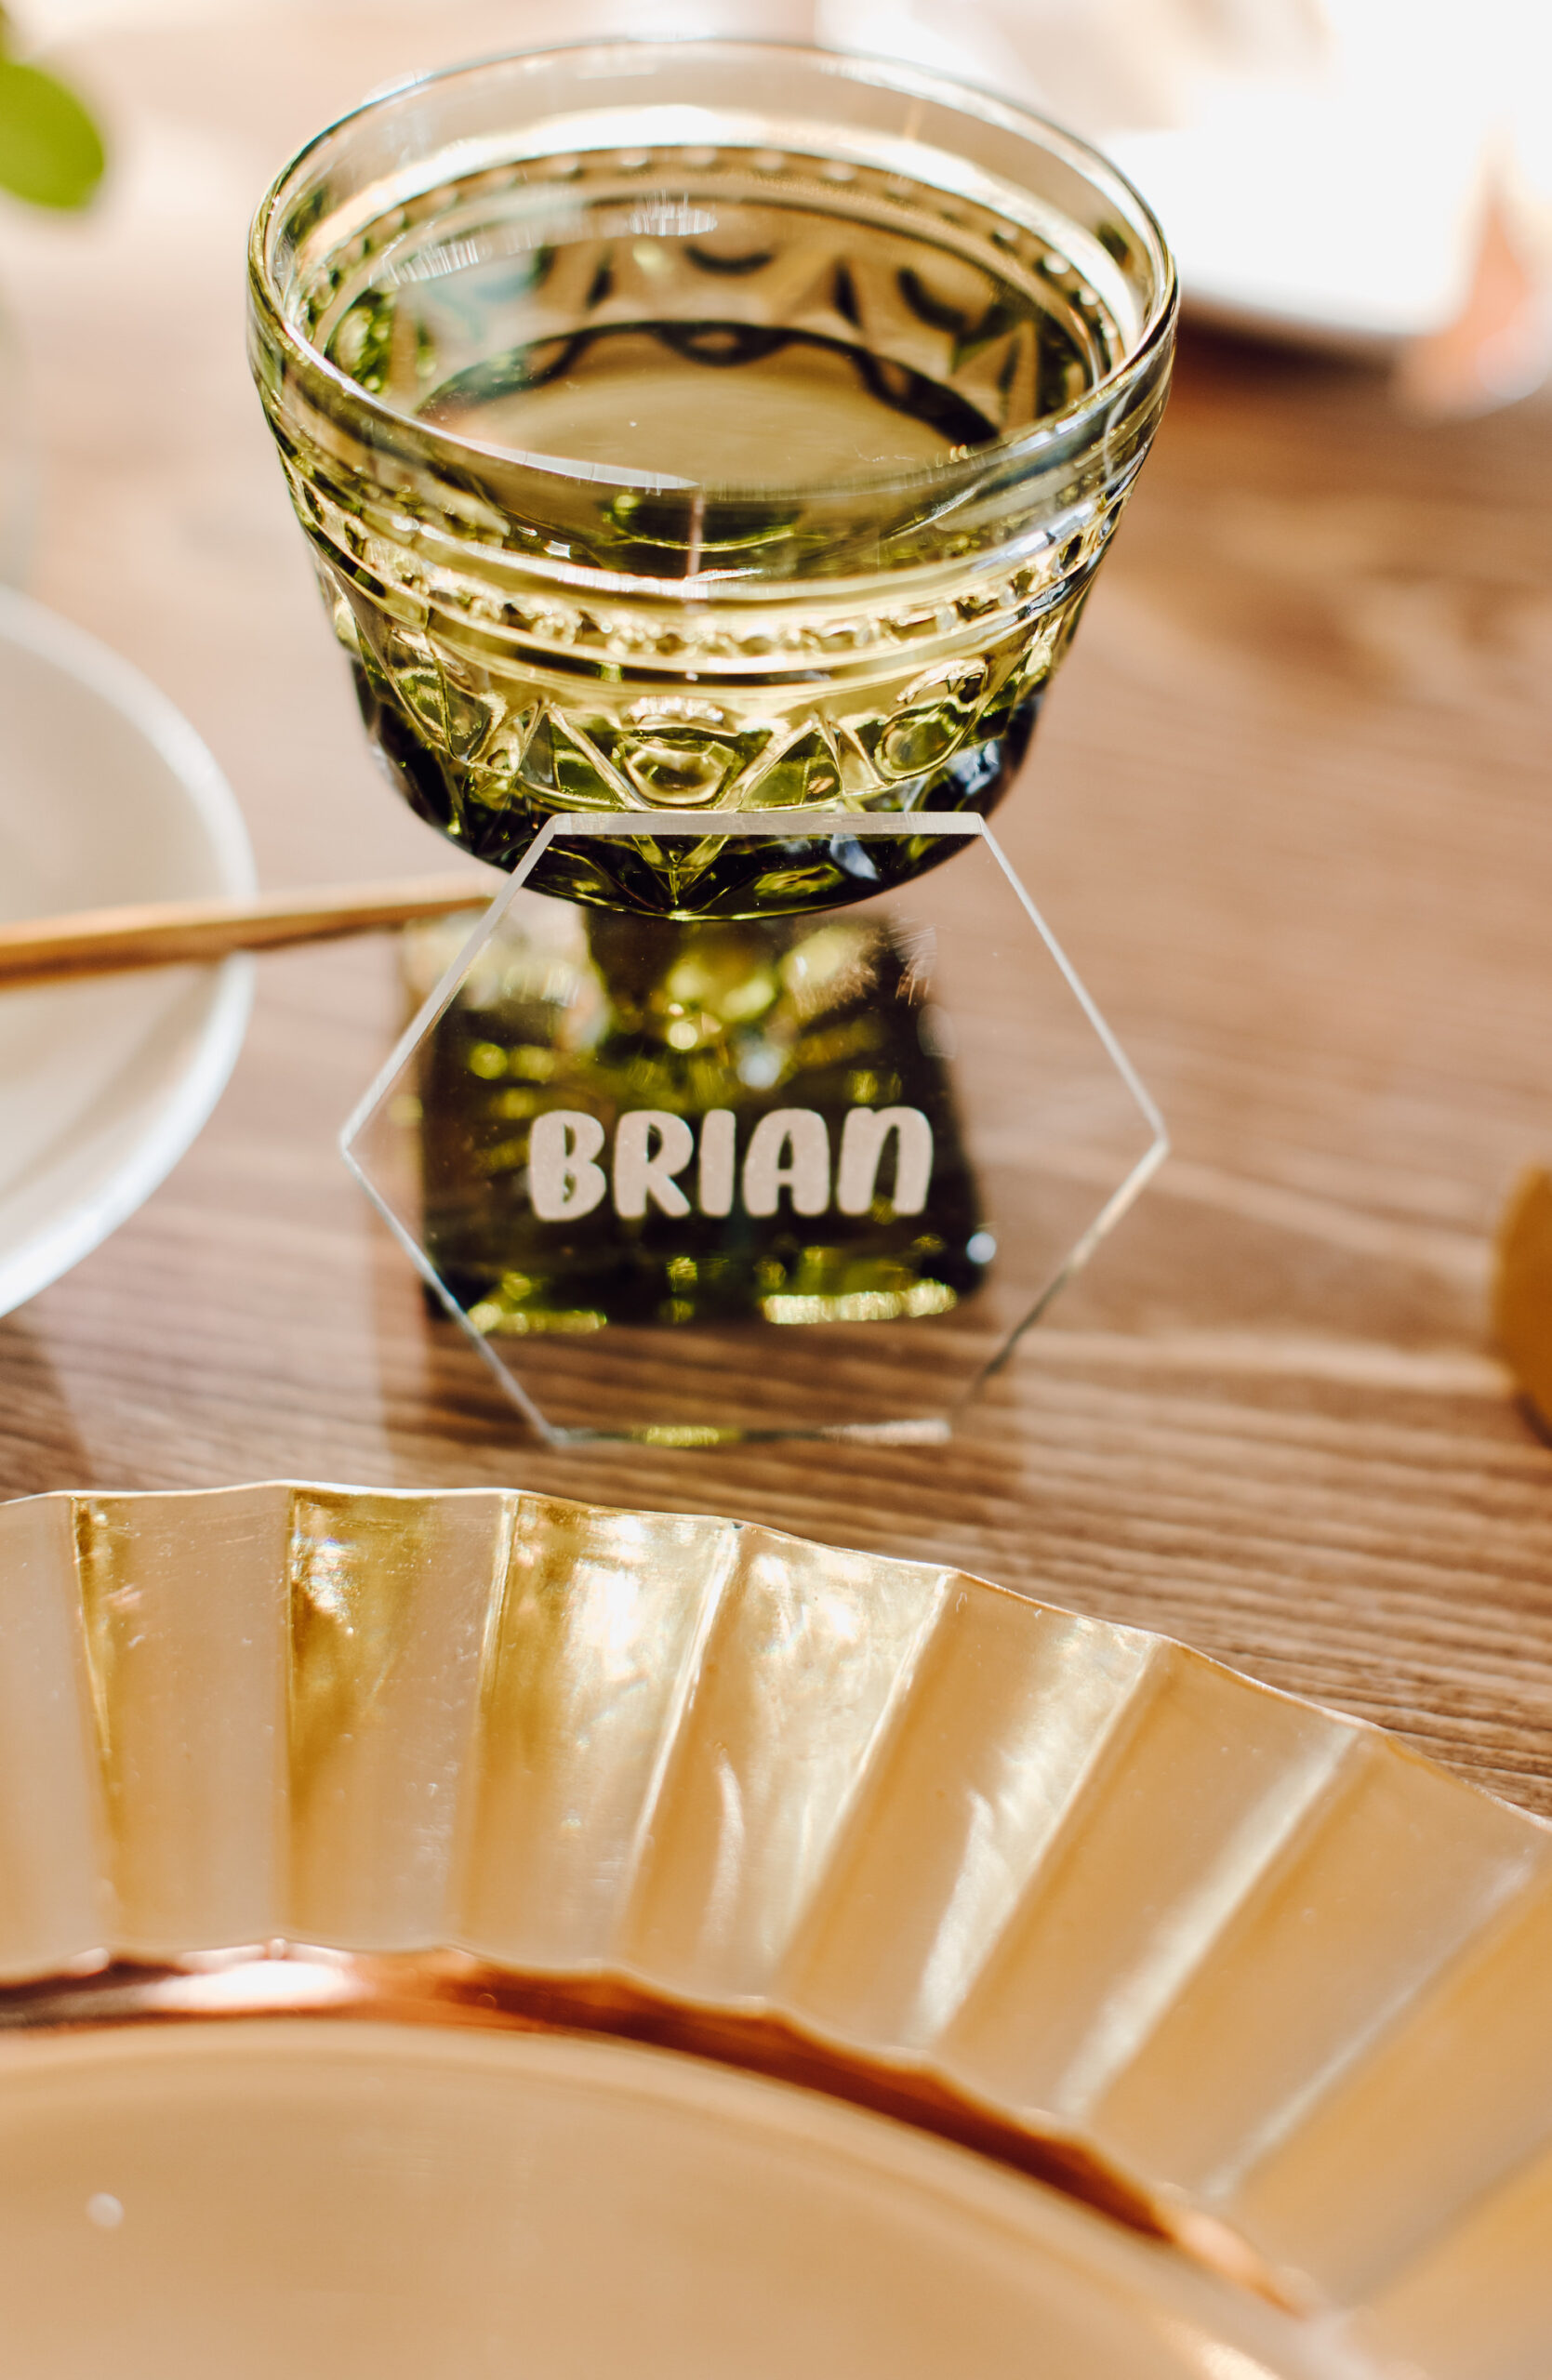 Acrylic Name Place Cards | Gold Fluted Charger Plate with Green Glass Goblet Wedding Reception Table Setting Inspiration